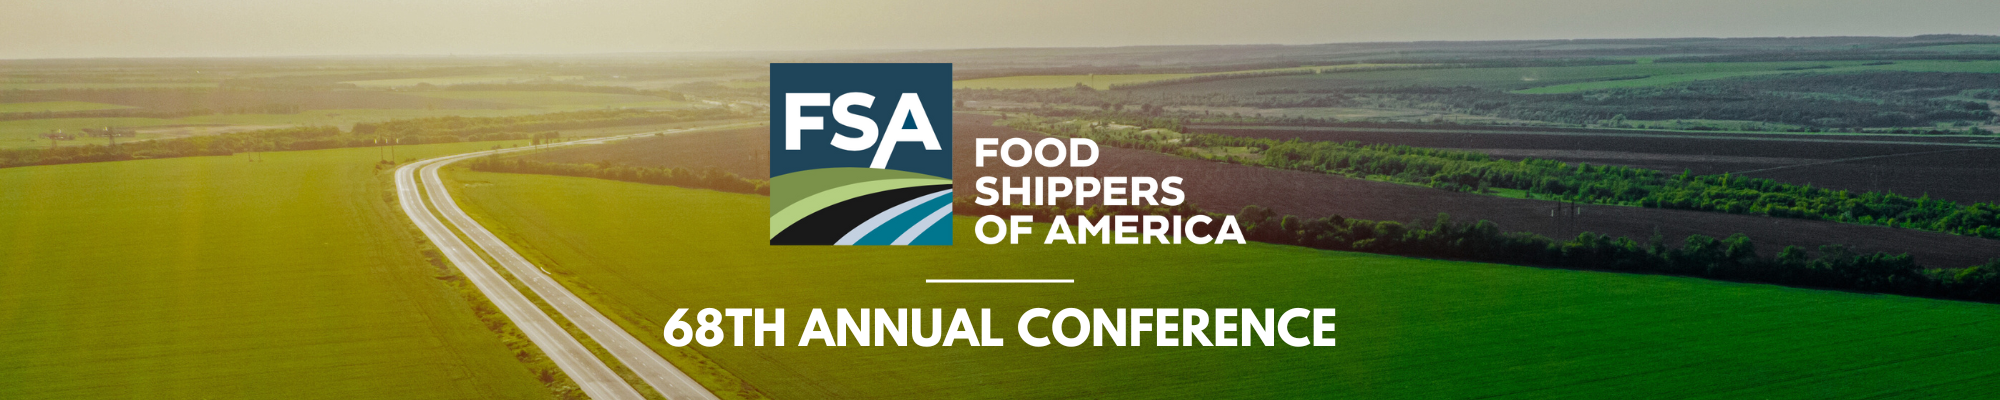 ALC Logistics will attend Food Shippers of America 68th Annual Conference